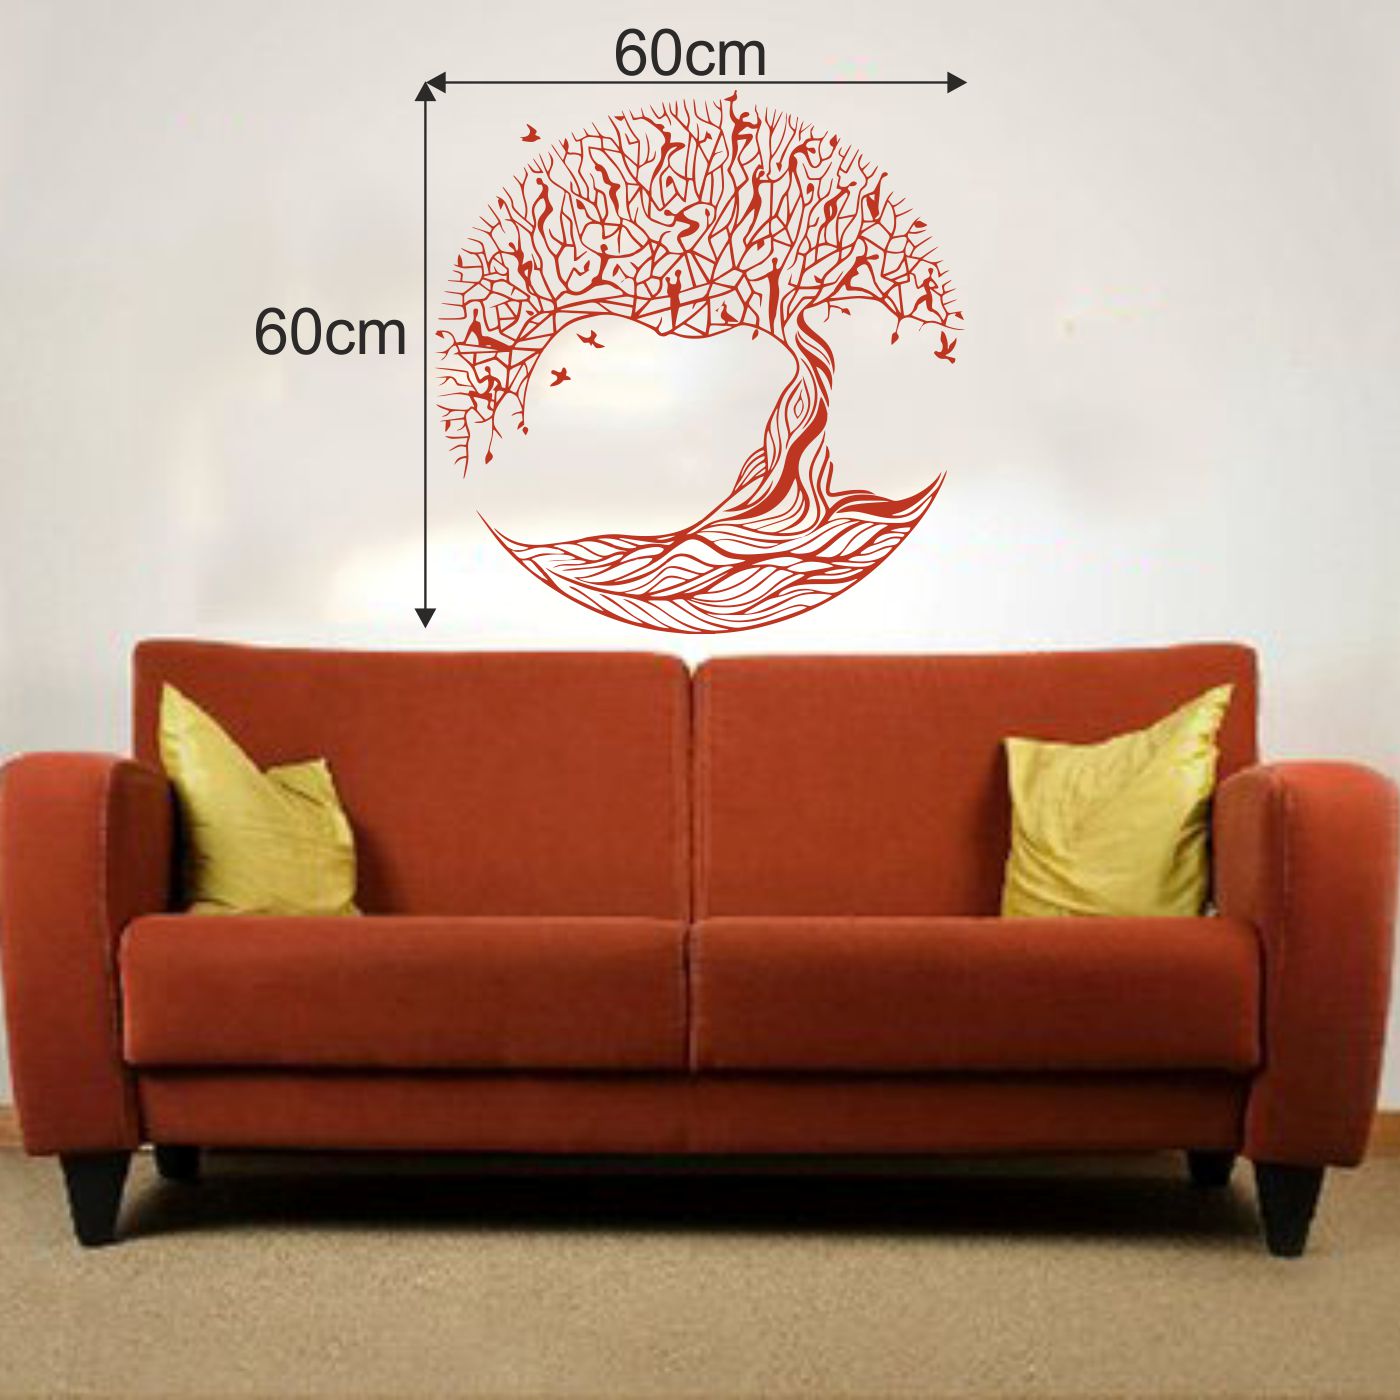 ORKA Nature Wall Decal Sticker 85  